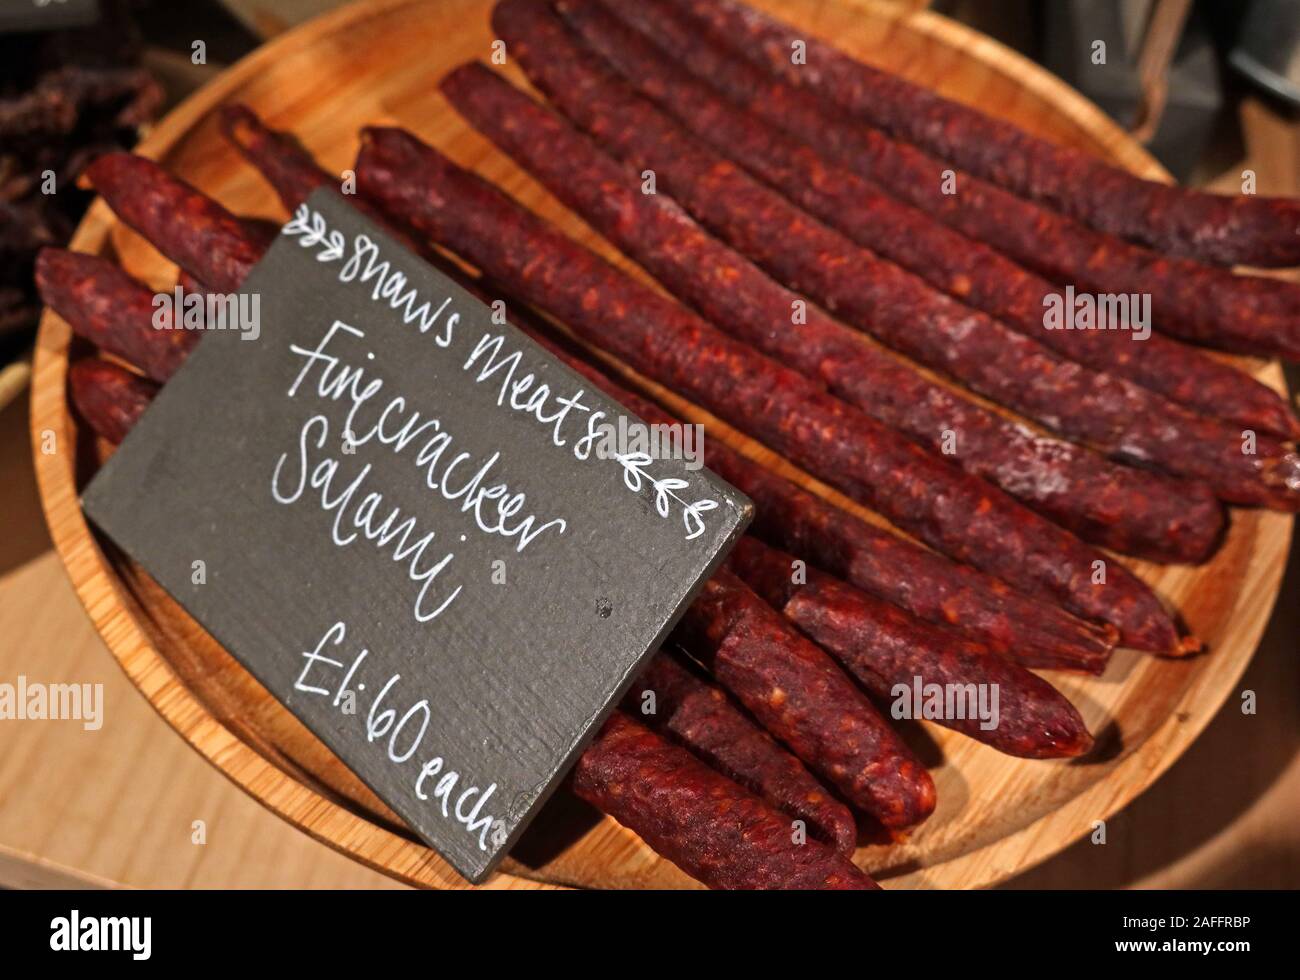 Artisan salami, Shaws Meats, on sale at organic,farmers market,Gloucestershire,South West England, UK, meat products,from Cumbria Stock Photo